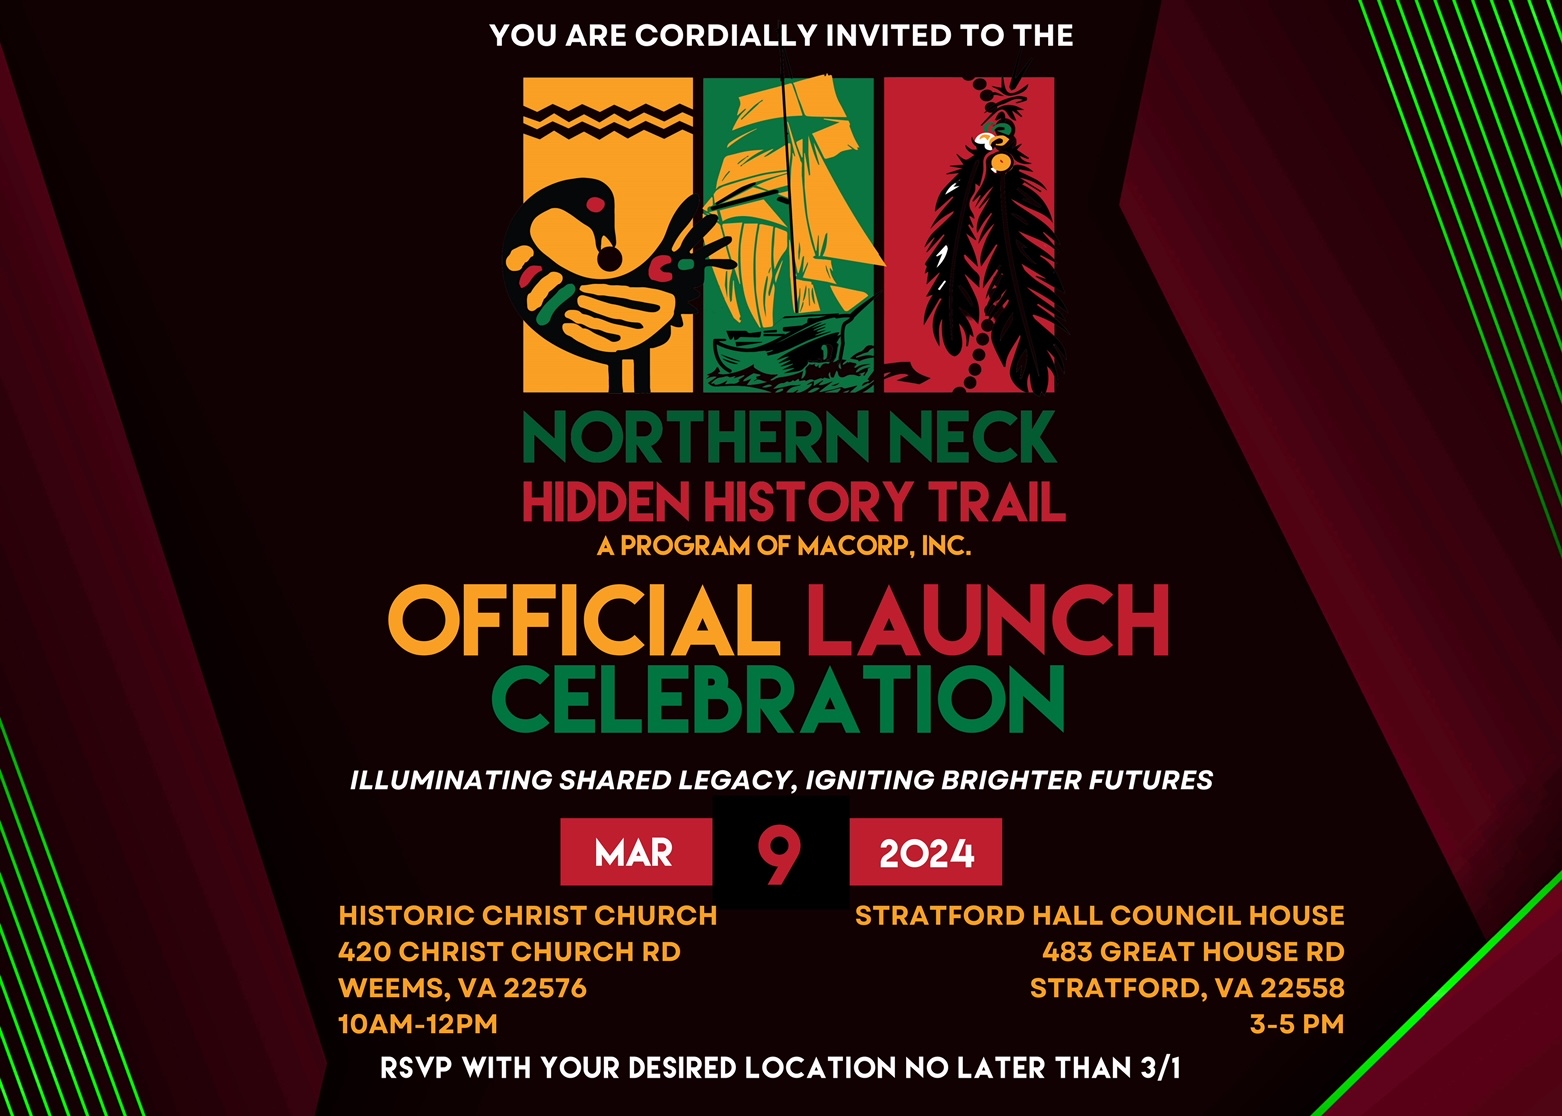 Northern Neck Hidden History Trail Official Launch Celebration